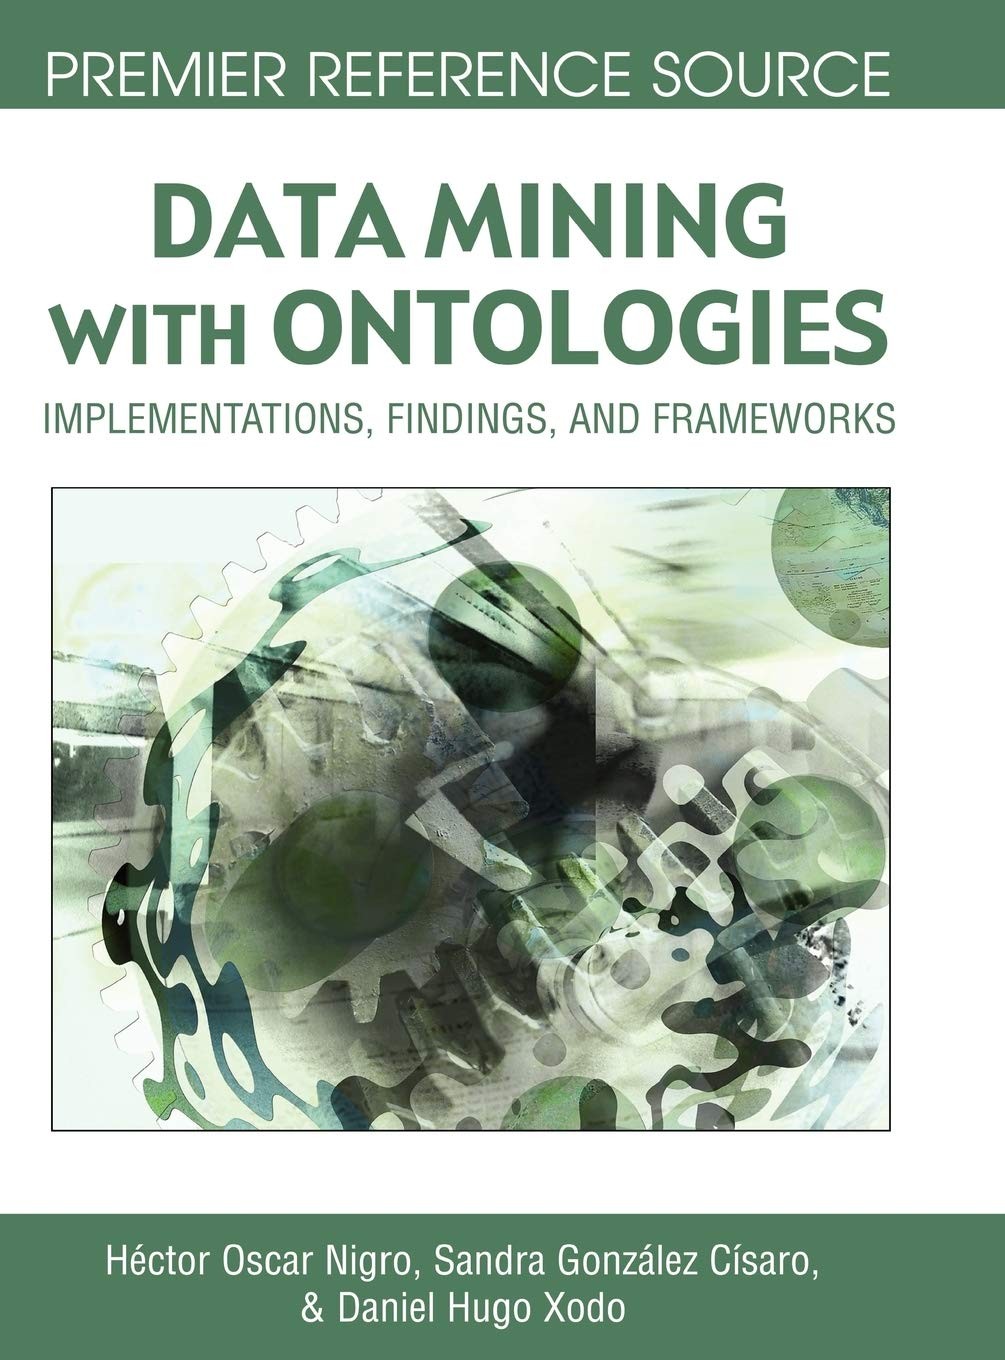 Data Mining With Ontologies: Implementations, Findings, and Frameworks